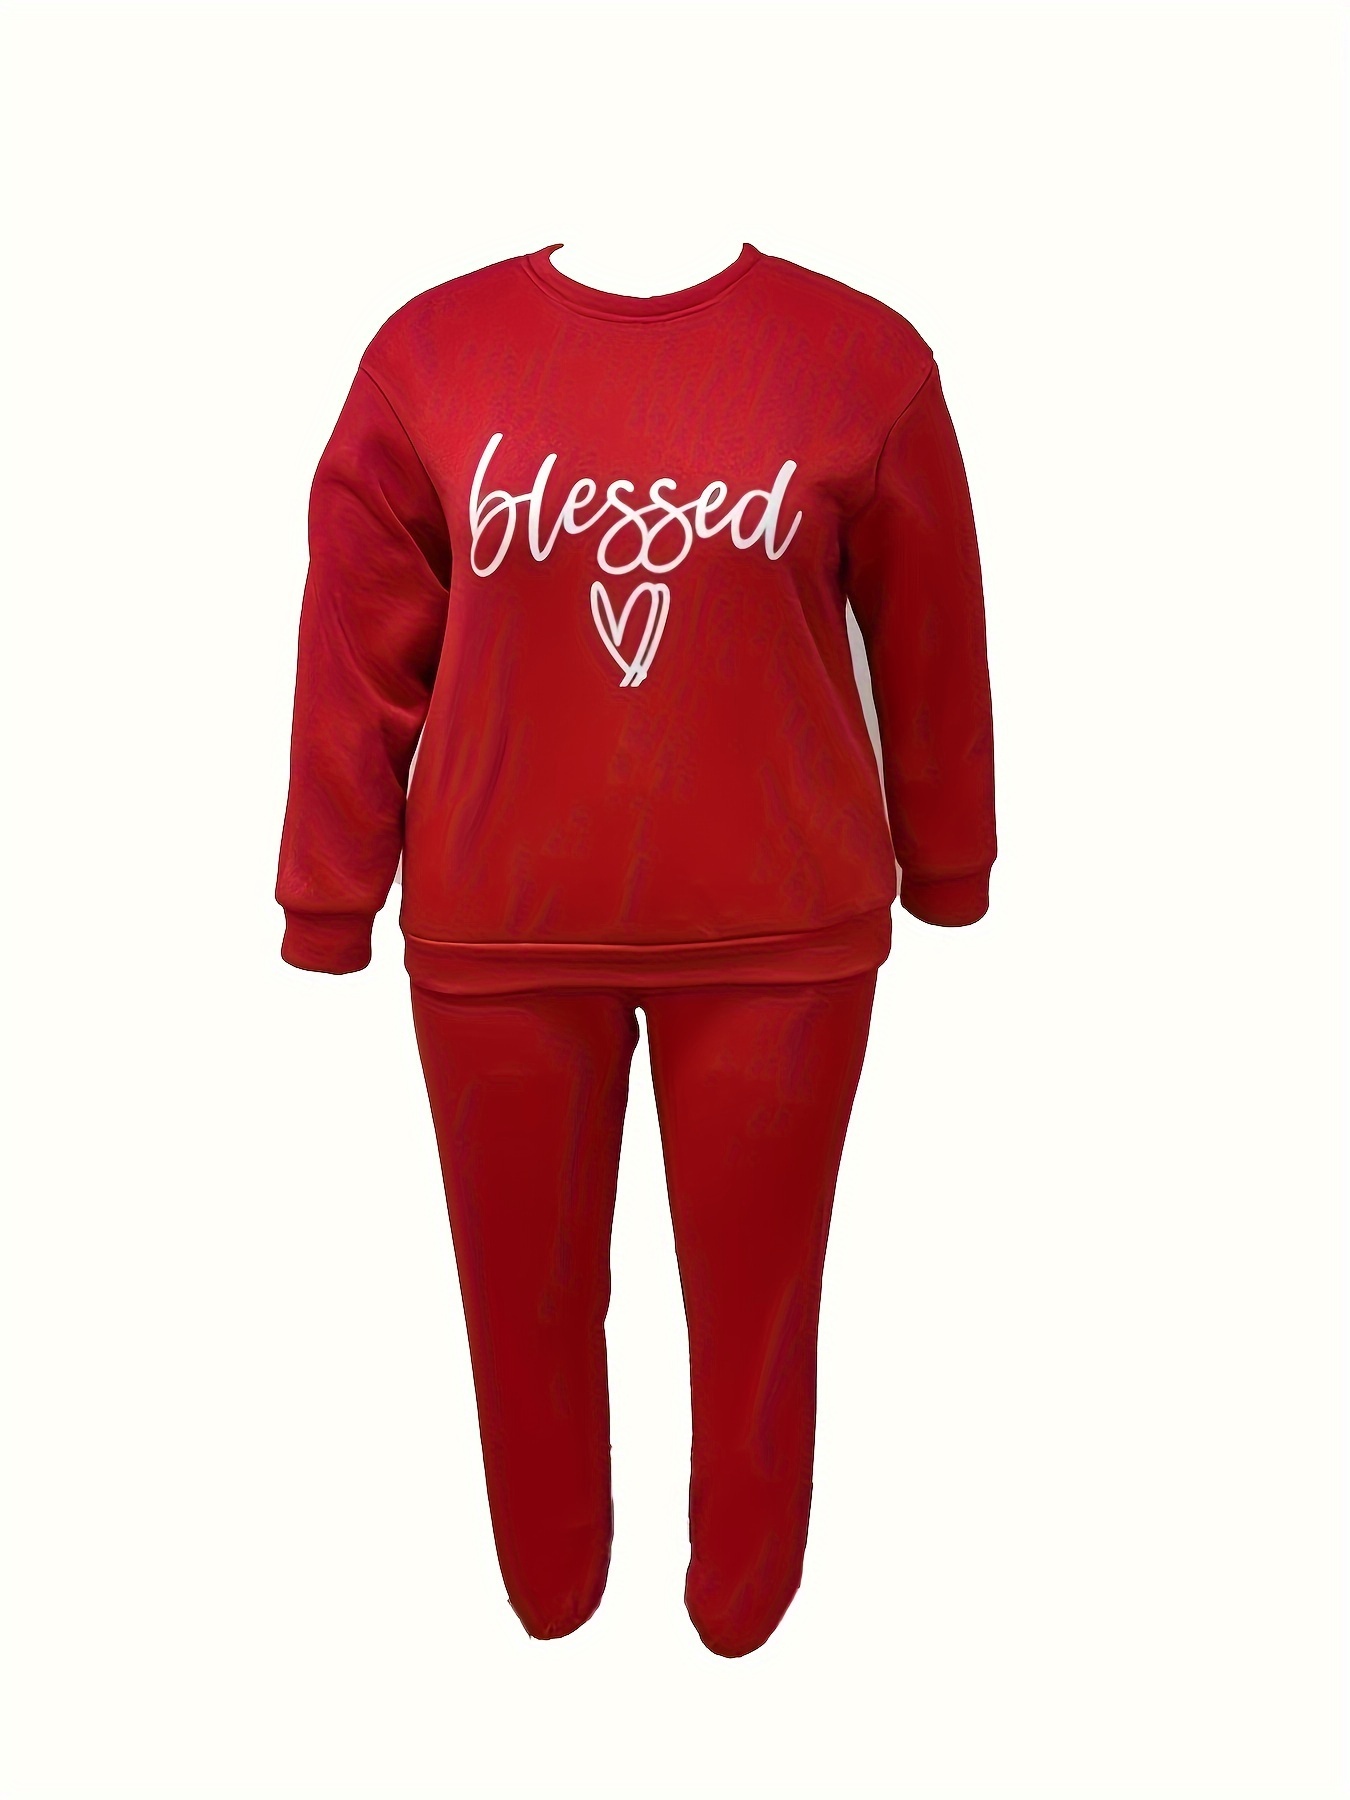 2022 Plus Size Womens LOVE Letter Print Tracksuit Set With High Neck Lilac  Sweatshirt, And Pants Streetwear Casual Outfit From Luxuryjewelry8889,  $42.62